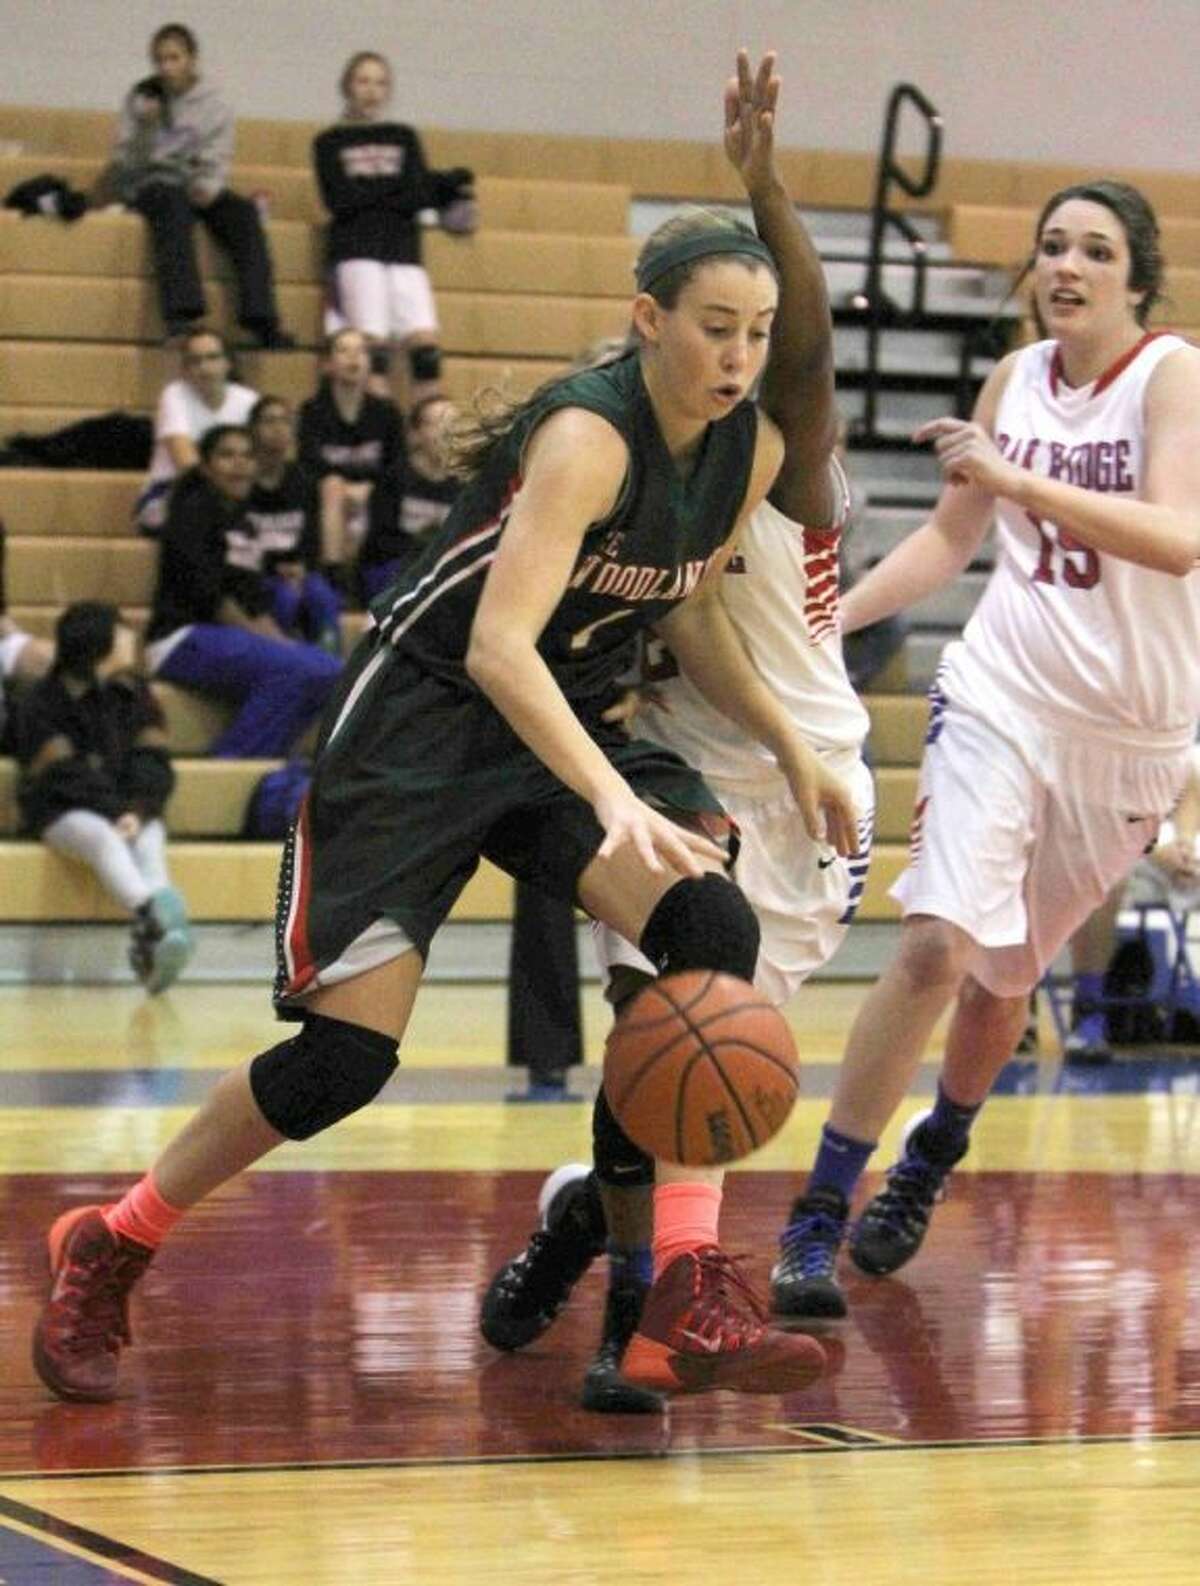 The Woodlands forward Nicole Iademarco dribbles in the paint during a District 14-5A game against Oak Ridge on Friday at Oak Ridge High School. The Lady Highlanders won, 67-35. To view or purchase this photo and others like it, visit HCNpics.com.